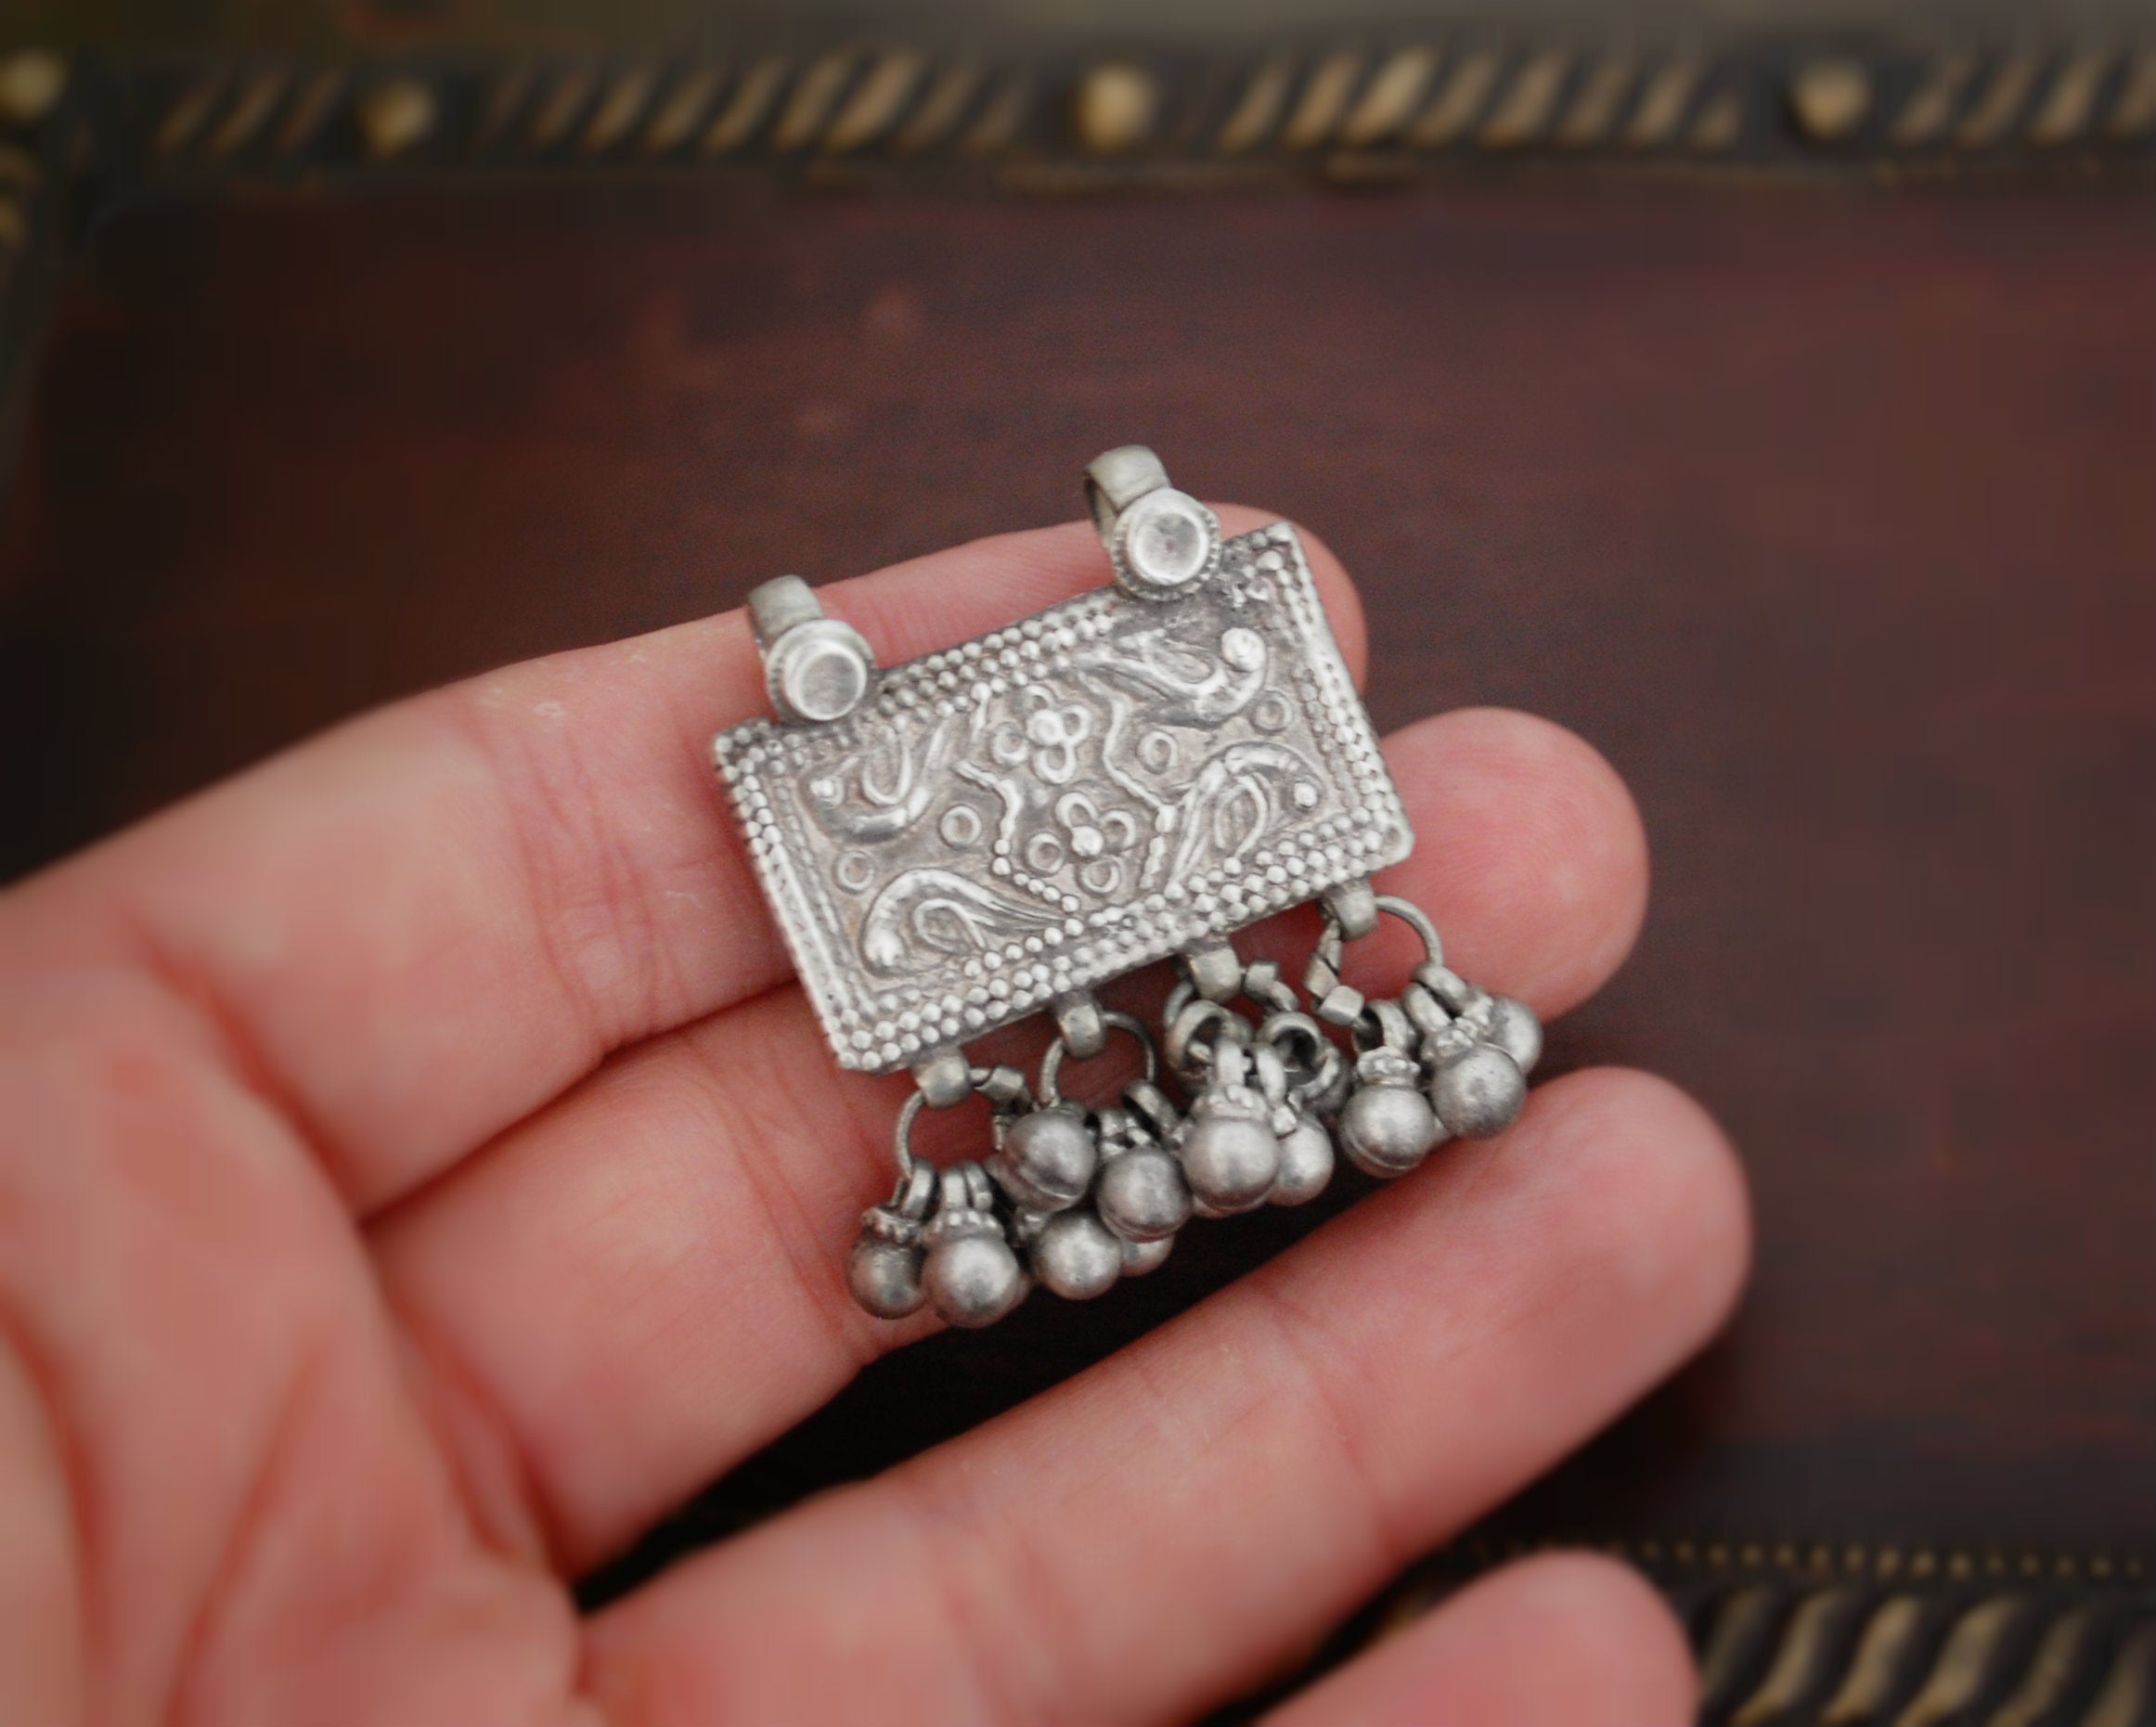 Rajasthani Silver Amulet with Bells